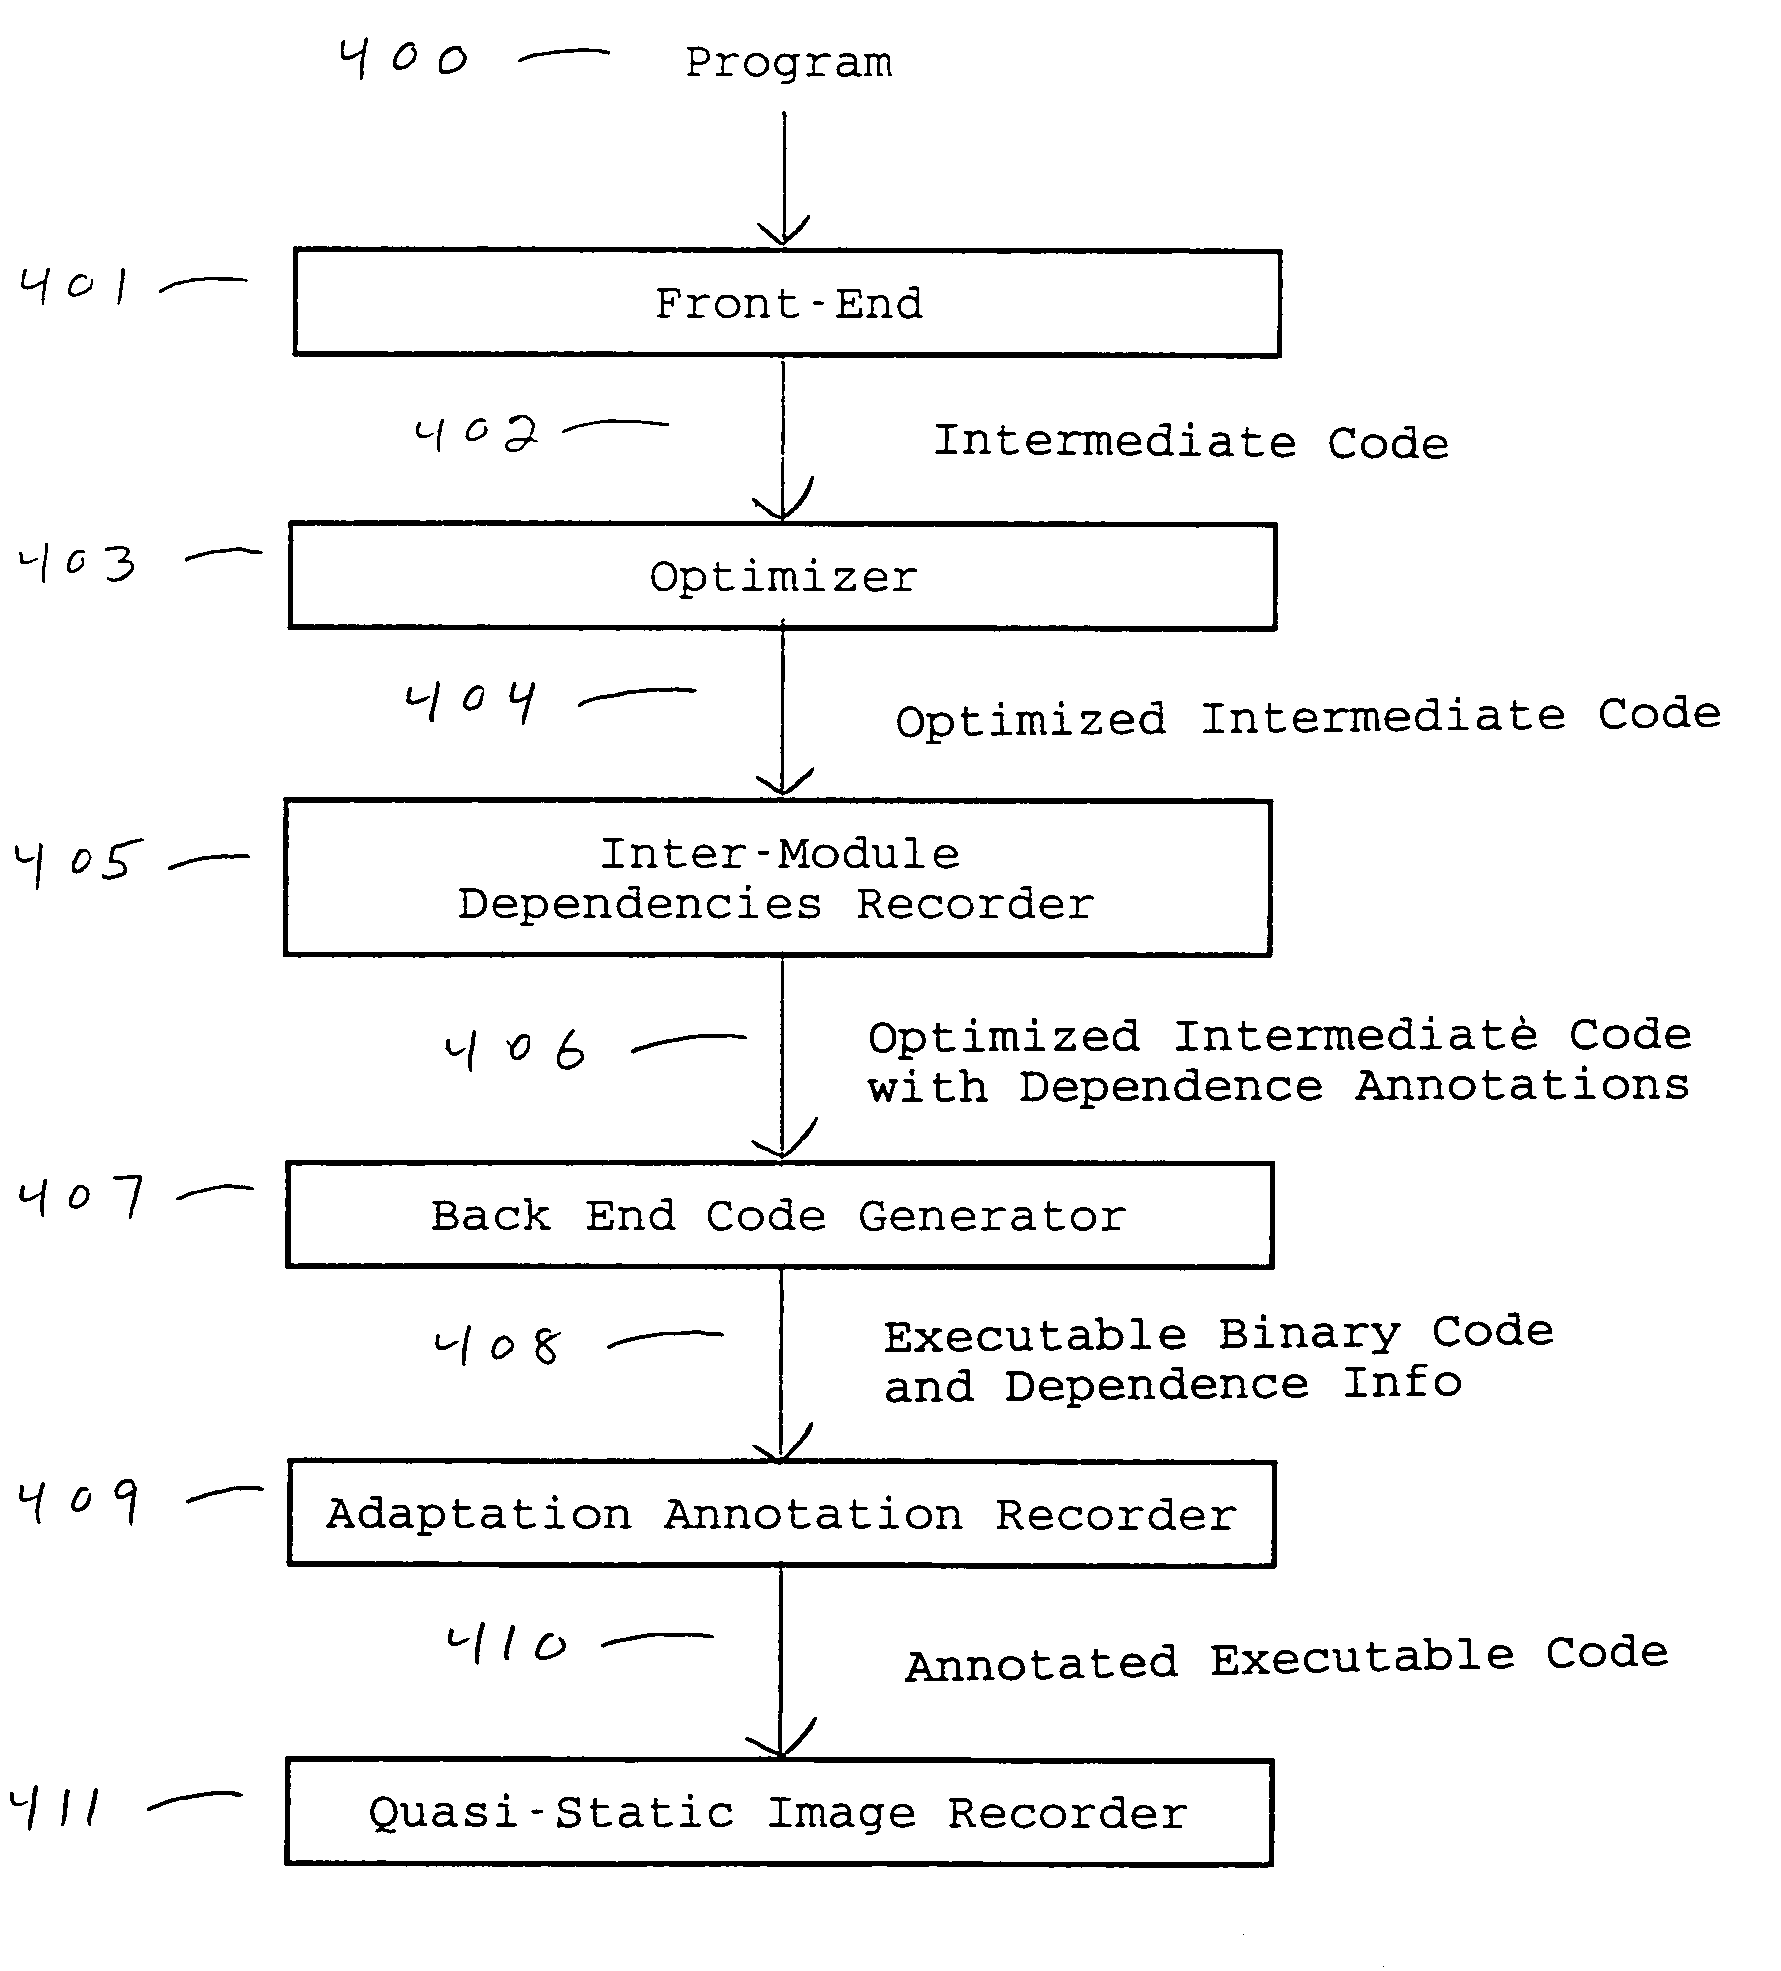 Method for compiling program components in a mixed static and dynamic environment